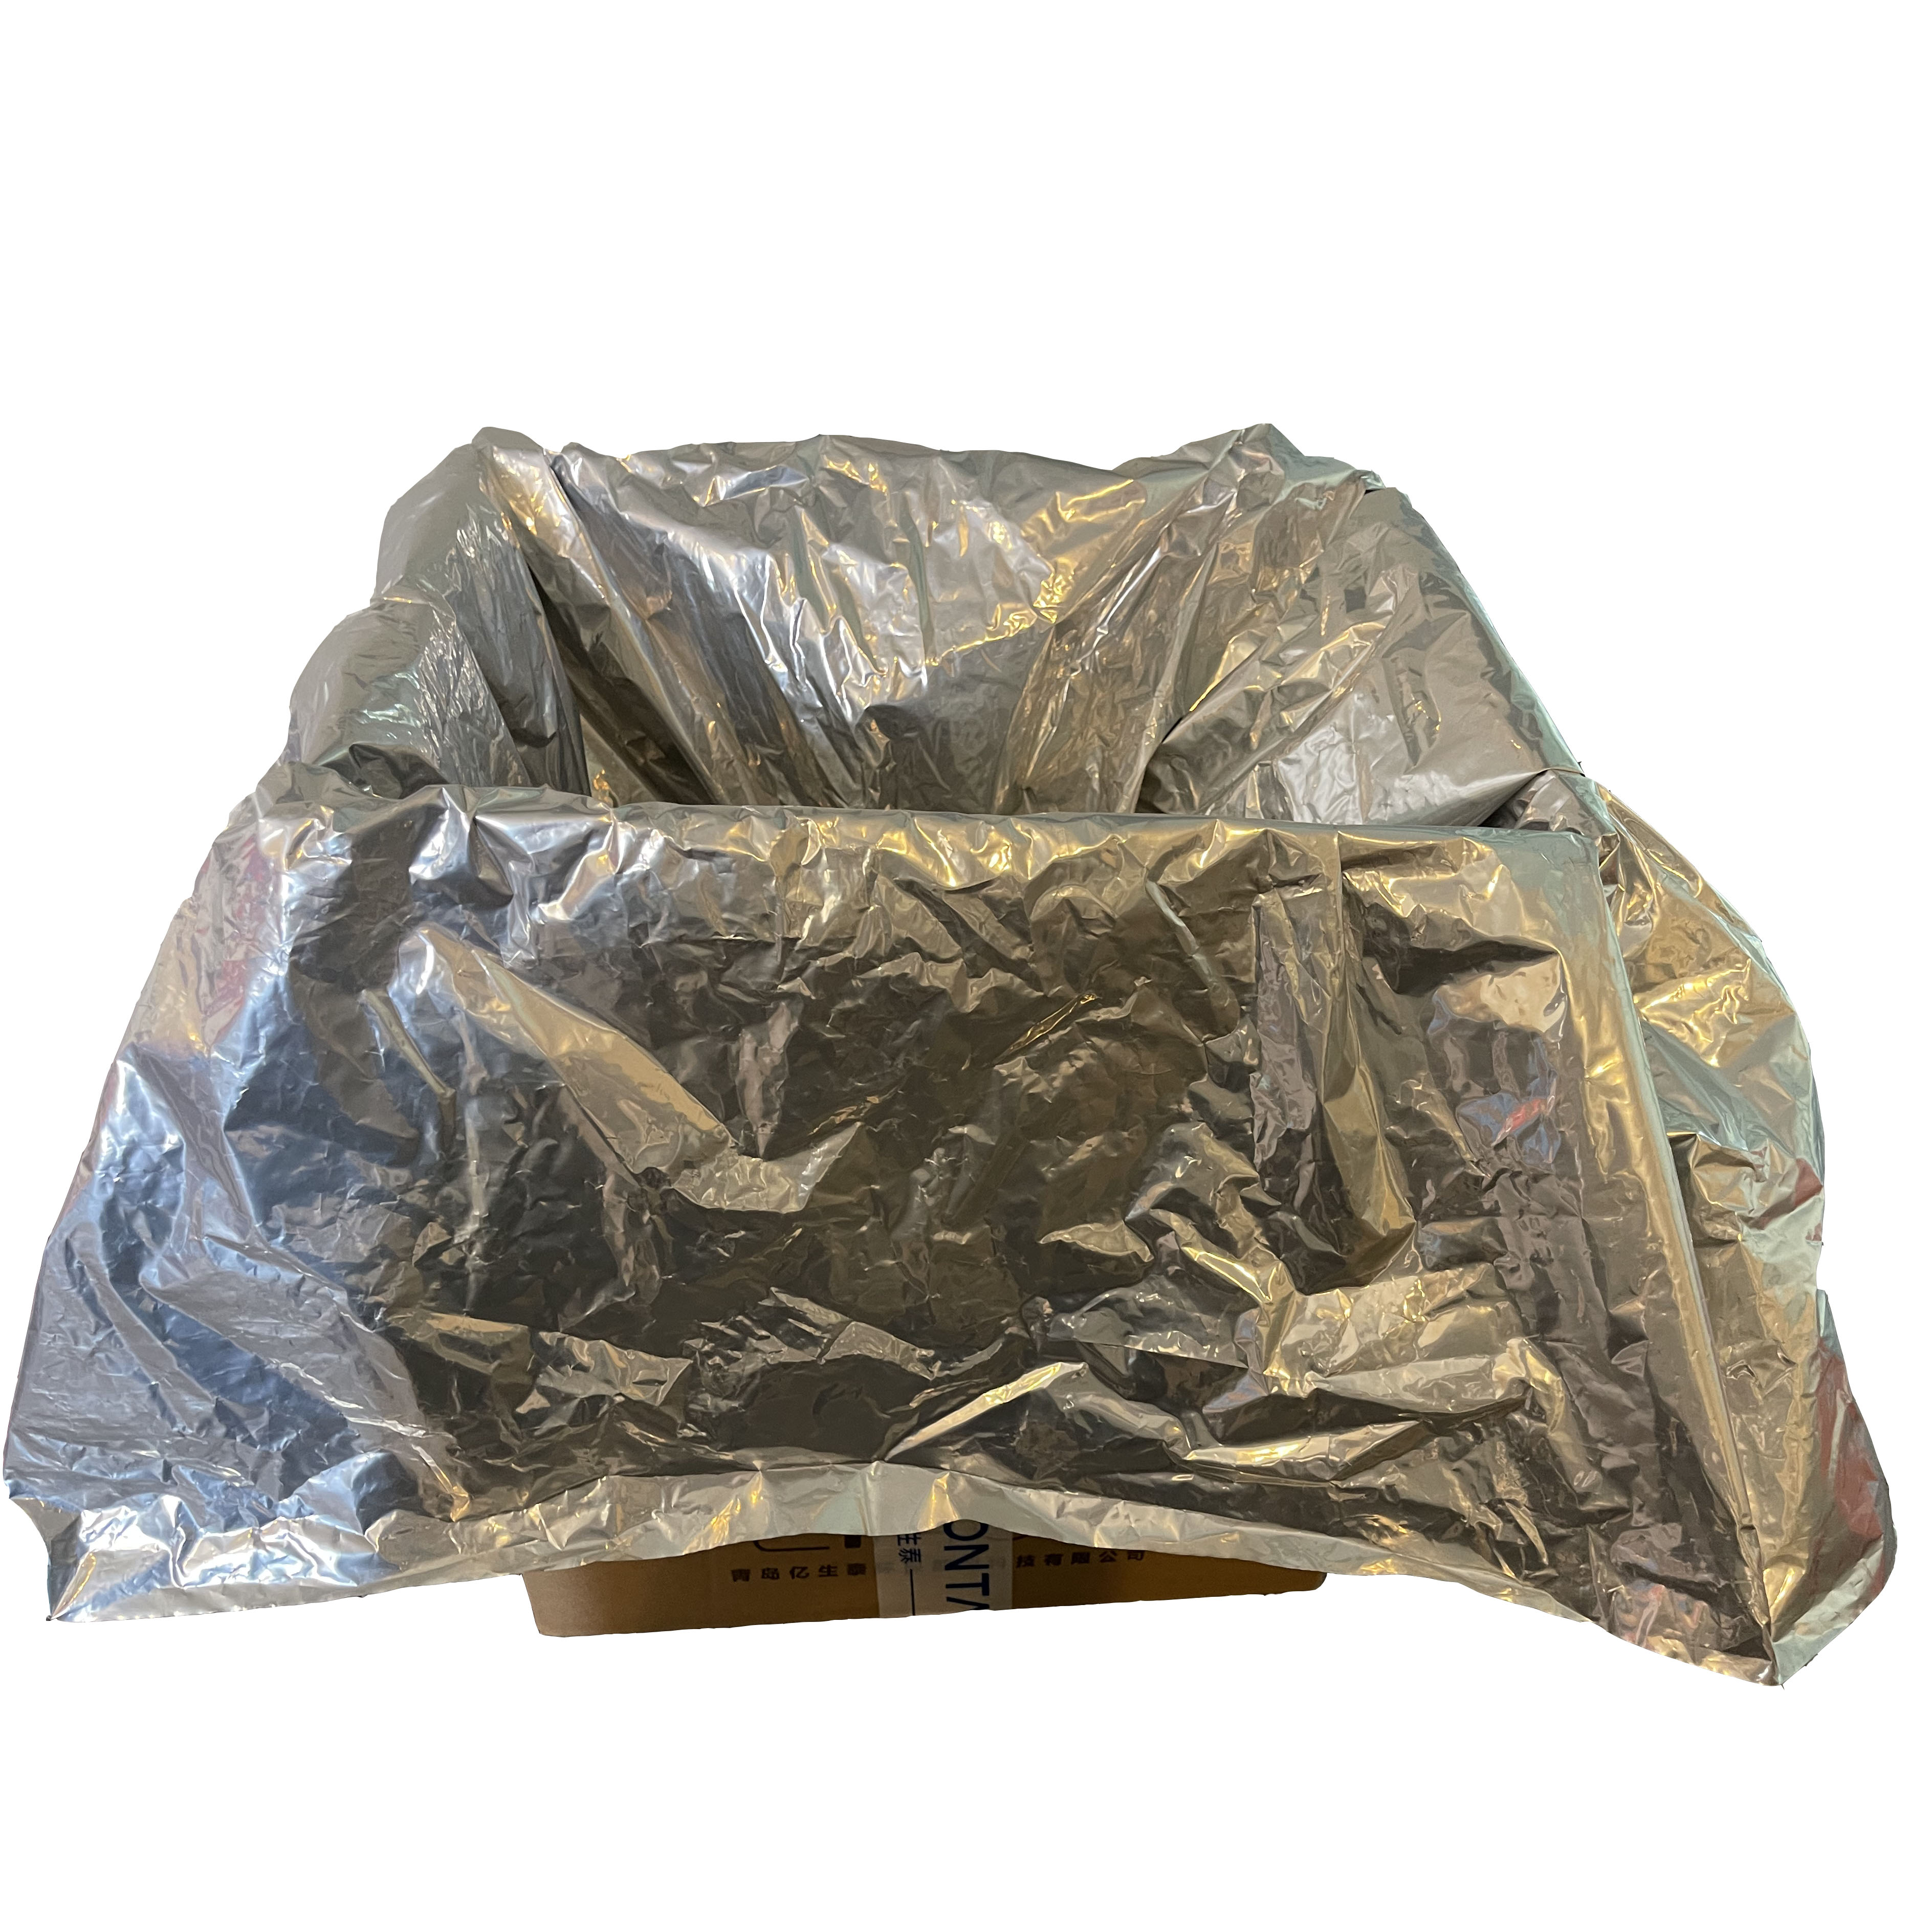 Oxygen sensitive Packaging Bags | Medicated Packaging Cooler Liners